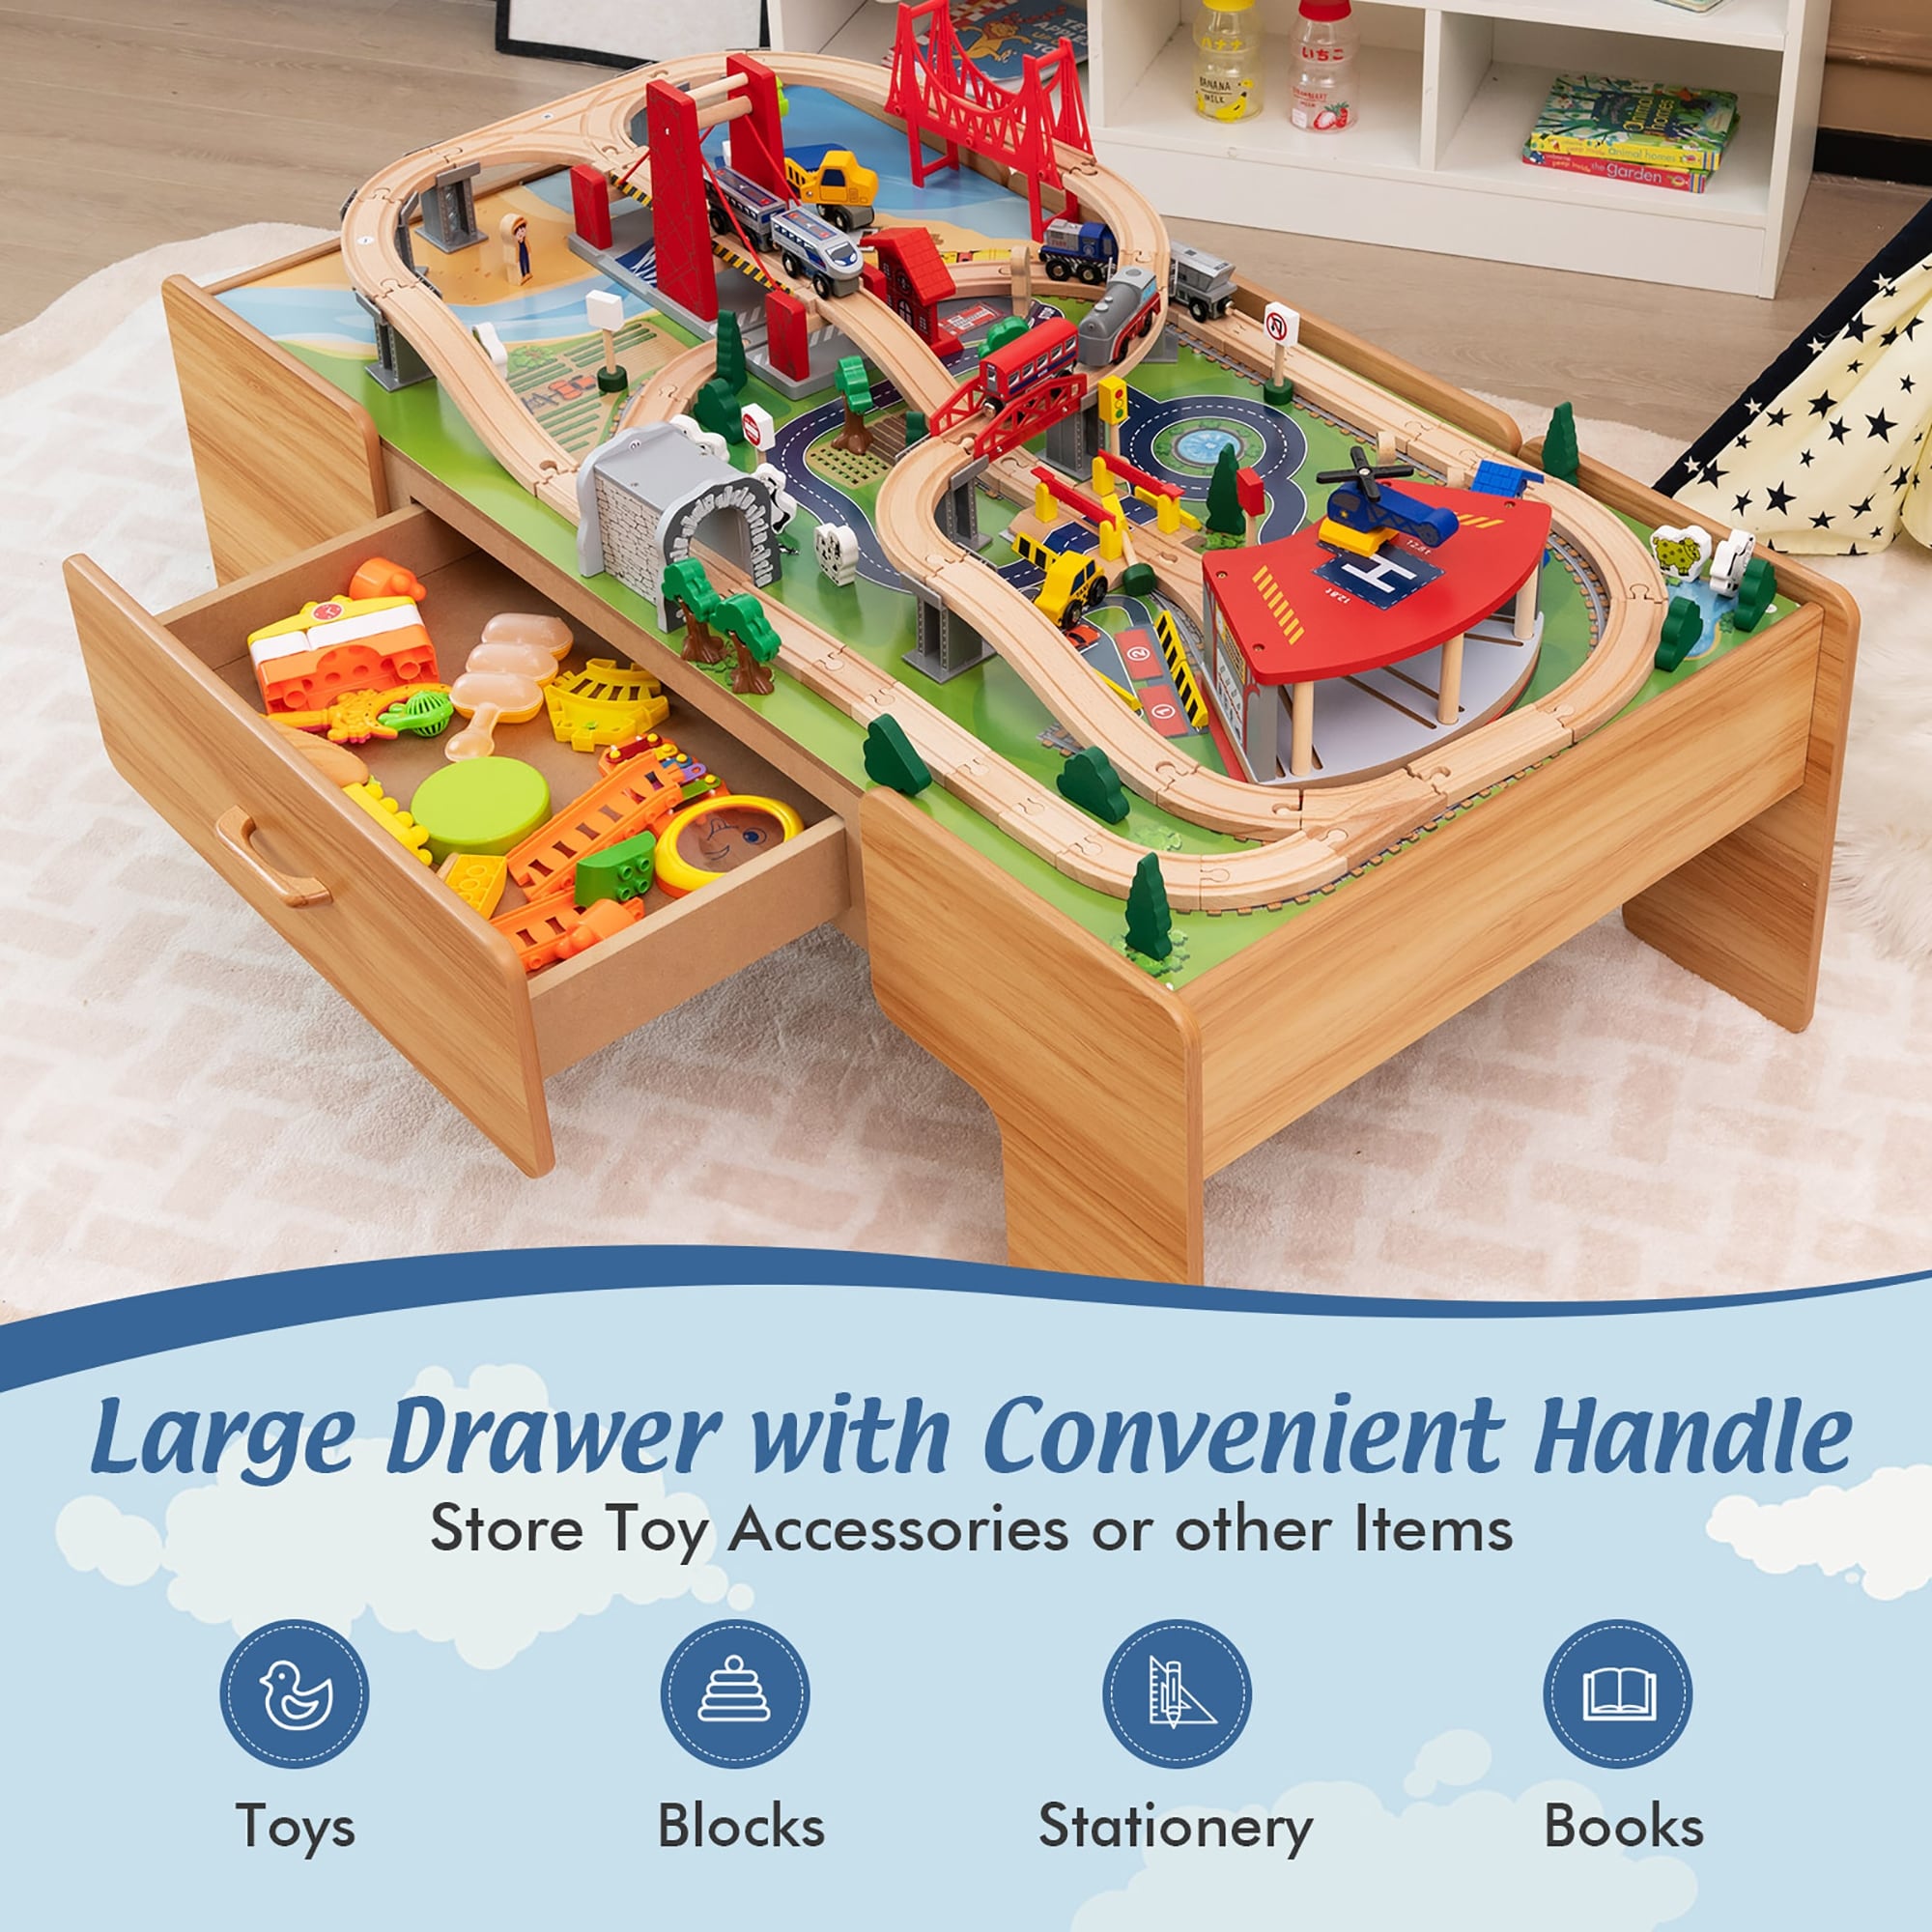 Costway Kids Wooden Train Set  Double-Sided Table Playset w/100 See  Details On Sale Bed Bath  Beyond 36548098